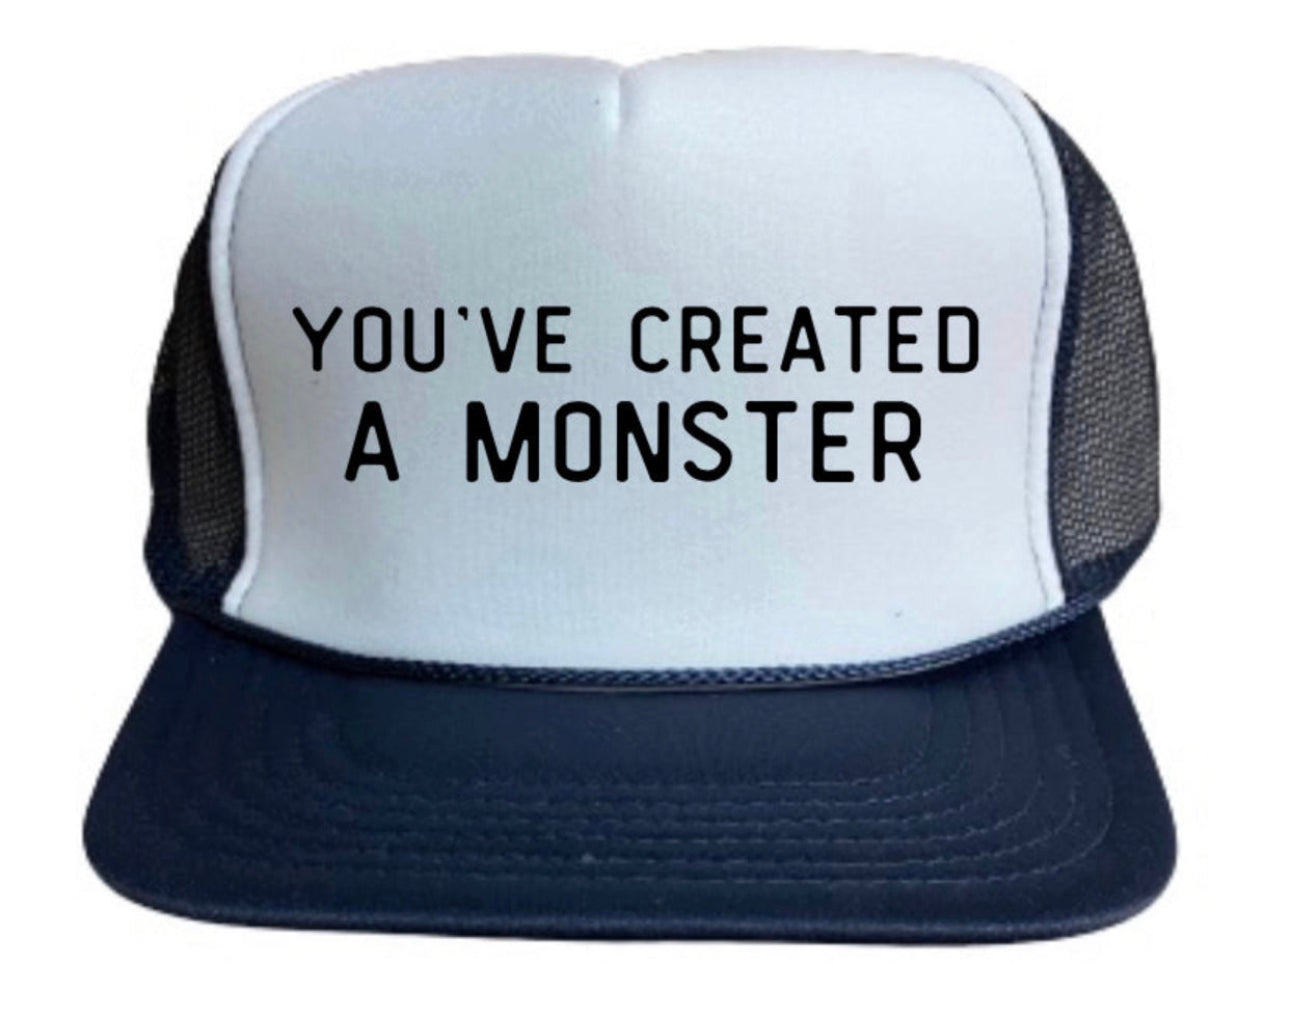 You’ve Created A Monster Trucker Hat